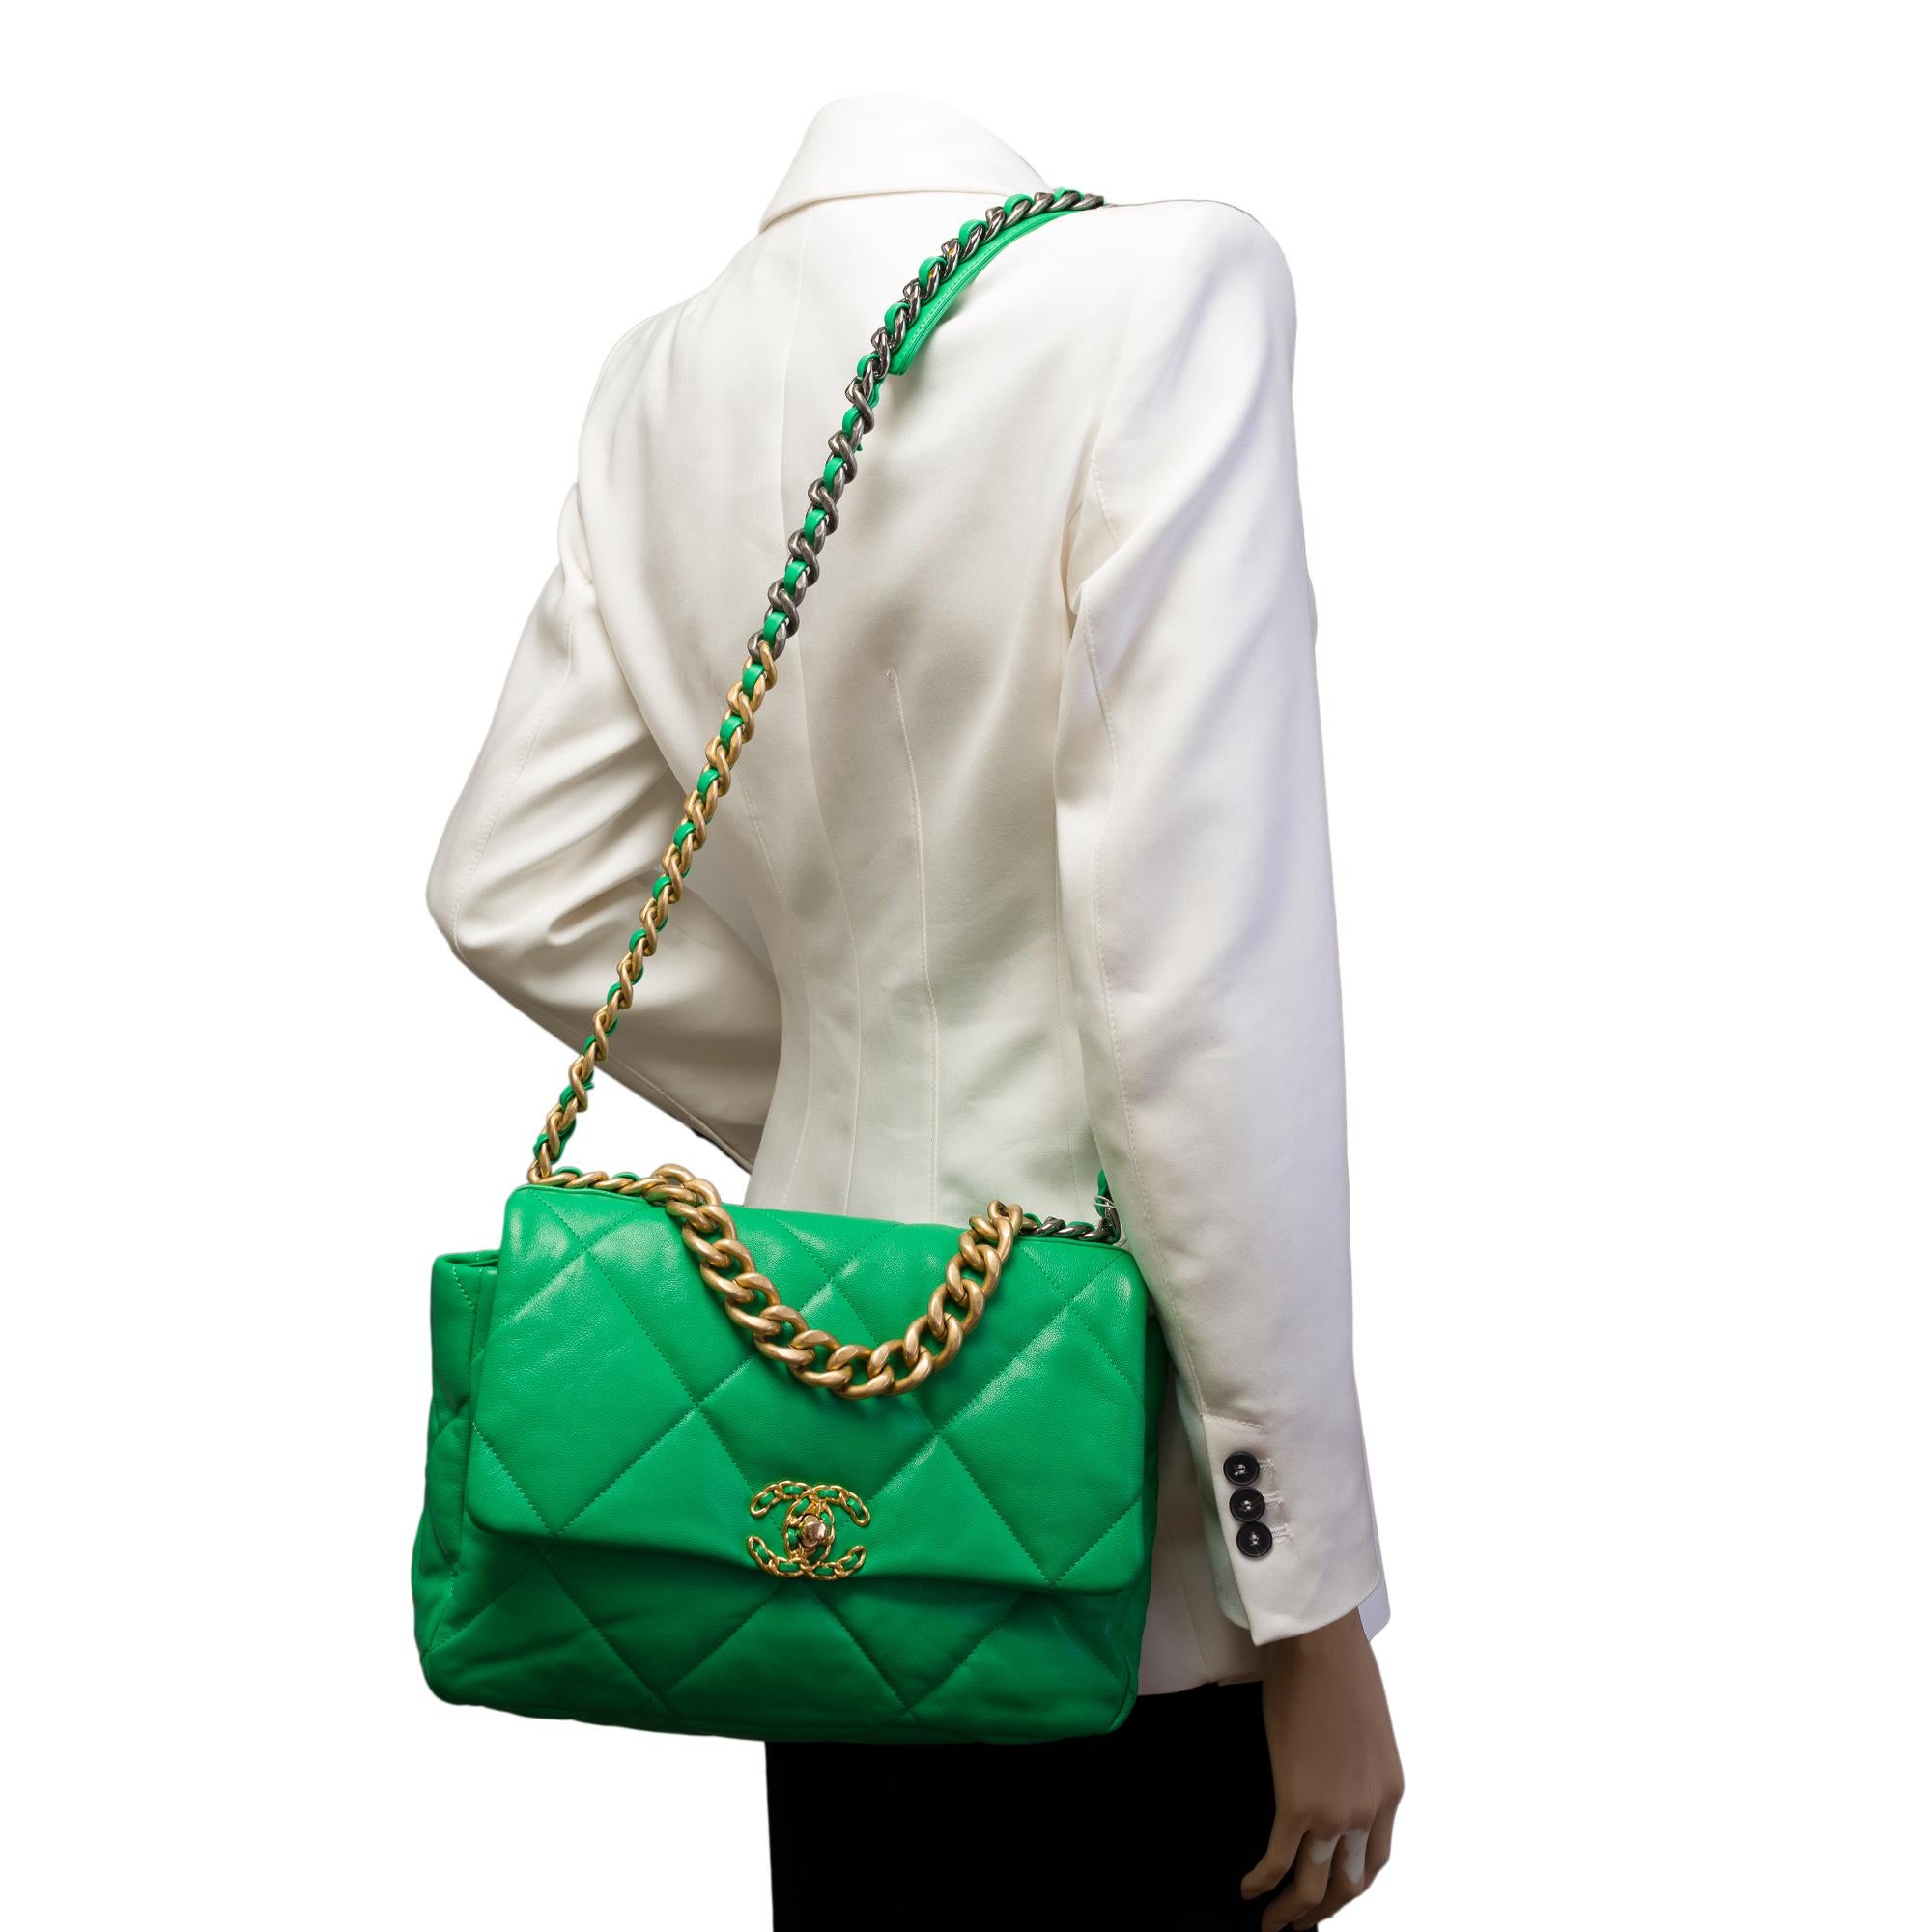 Stunning Chanel 19 shoulder bag in Green quilted leather , Matt gold and SHW 7